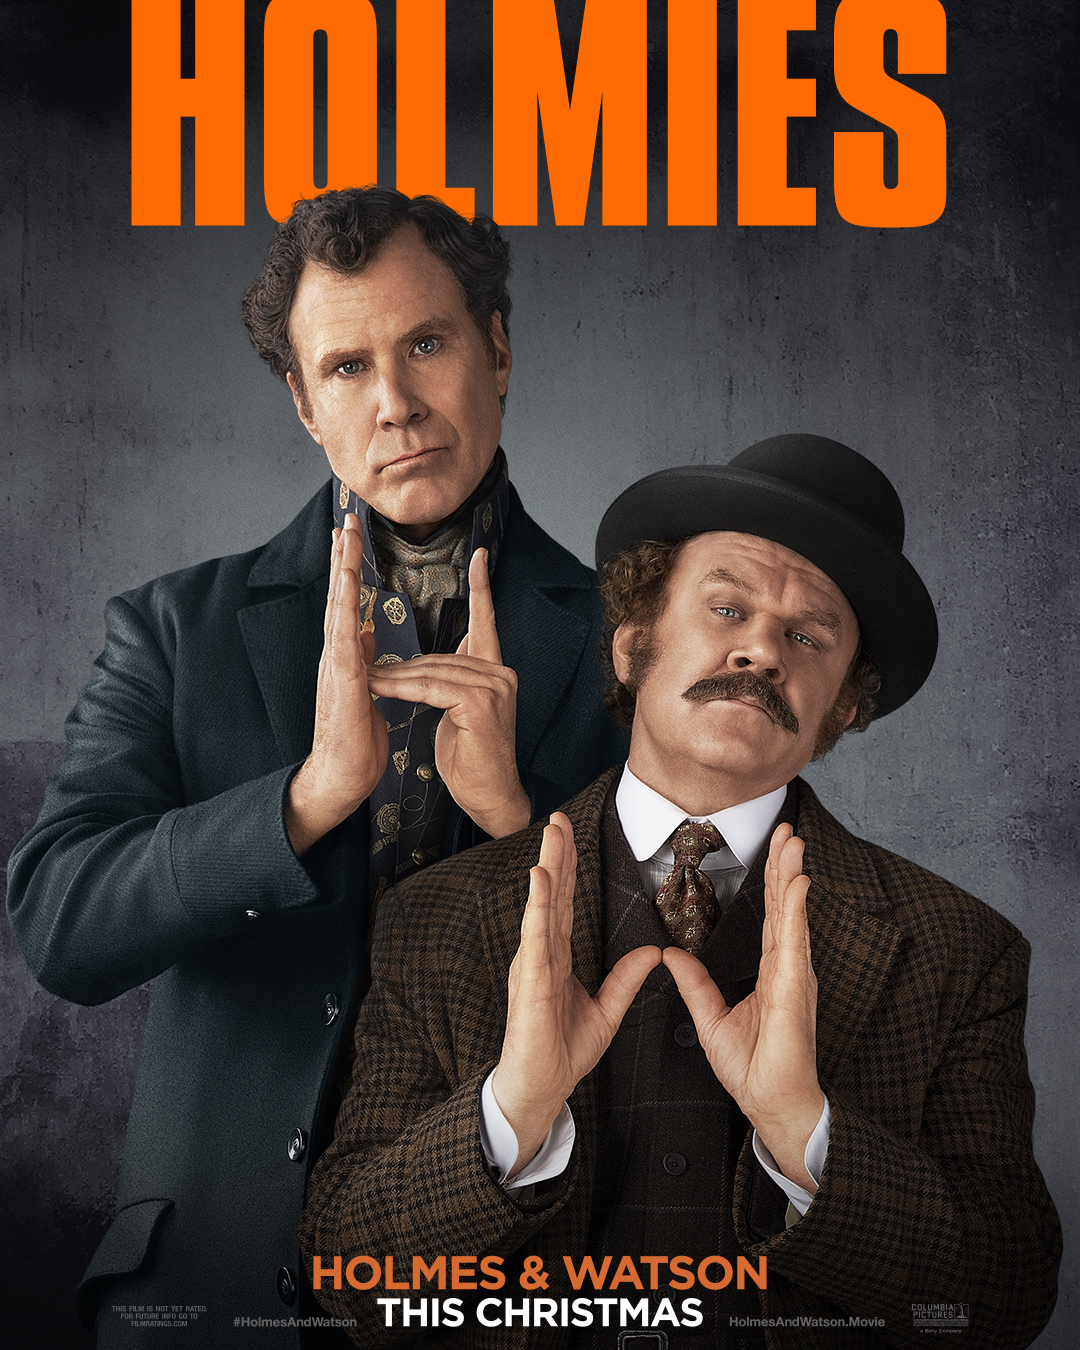 Holmes And Watson poster (Sony Pictures)